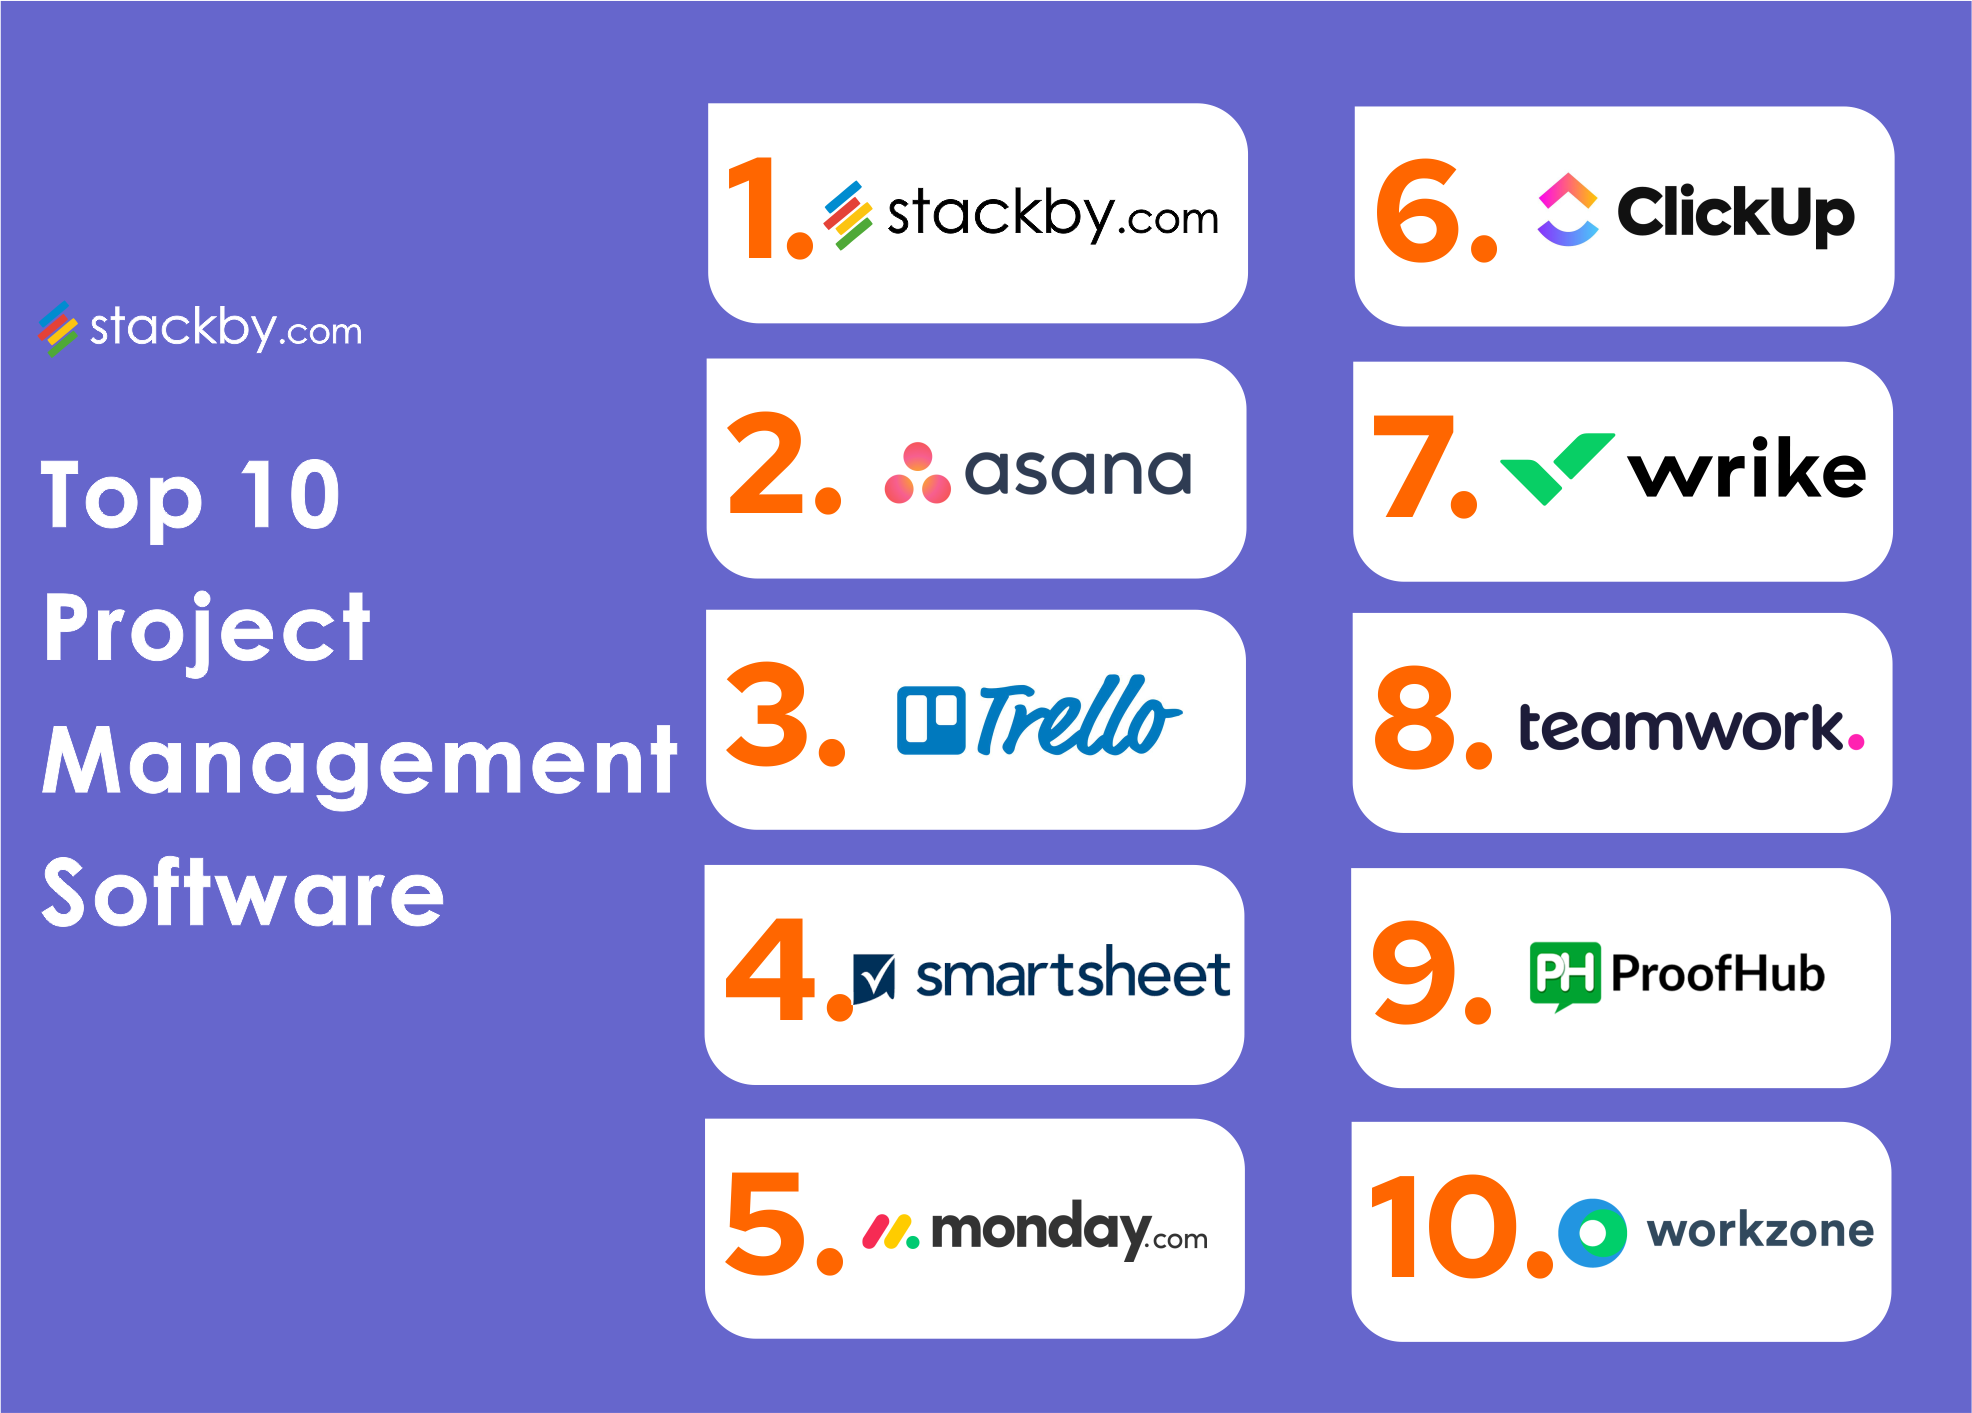 10 Best Photo Management Software Programs Of 2023-2024